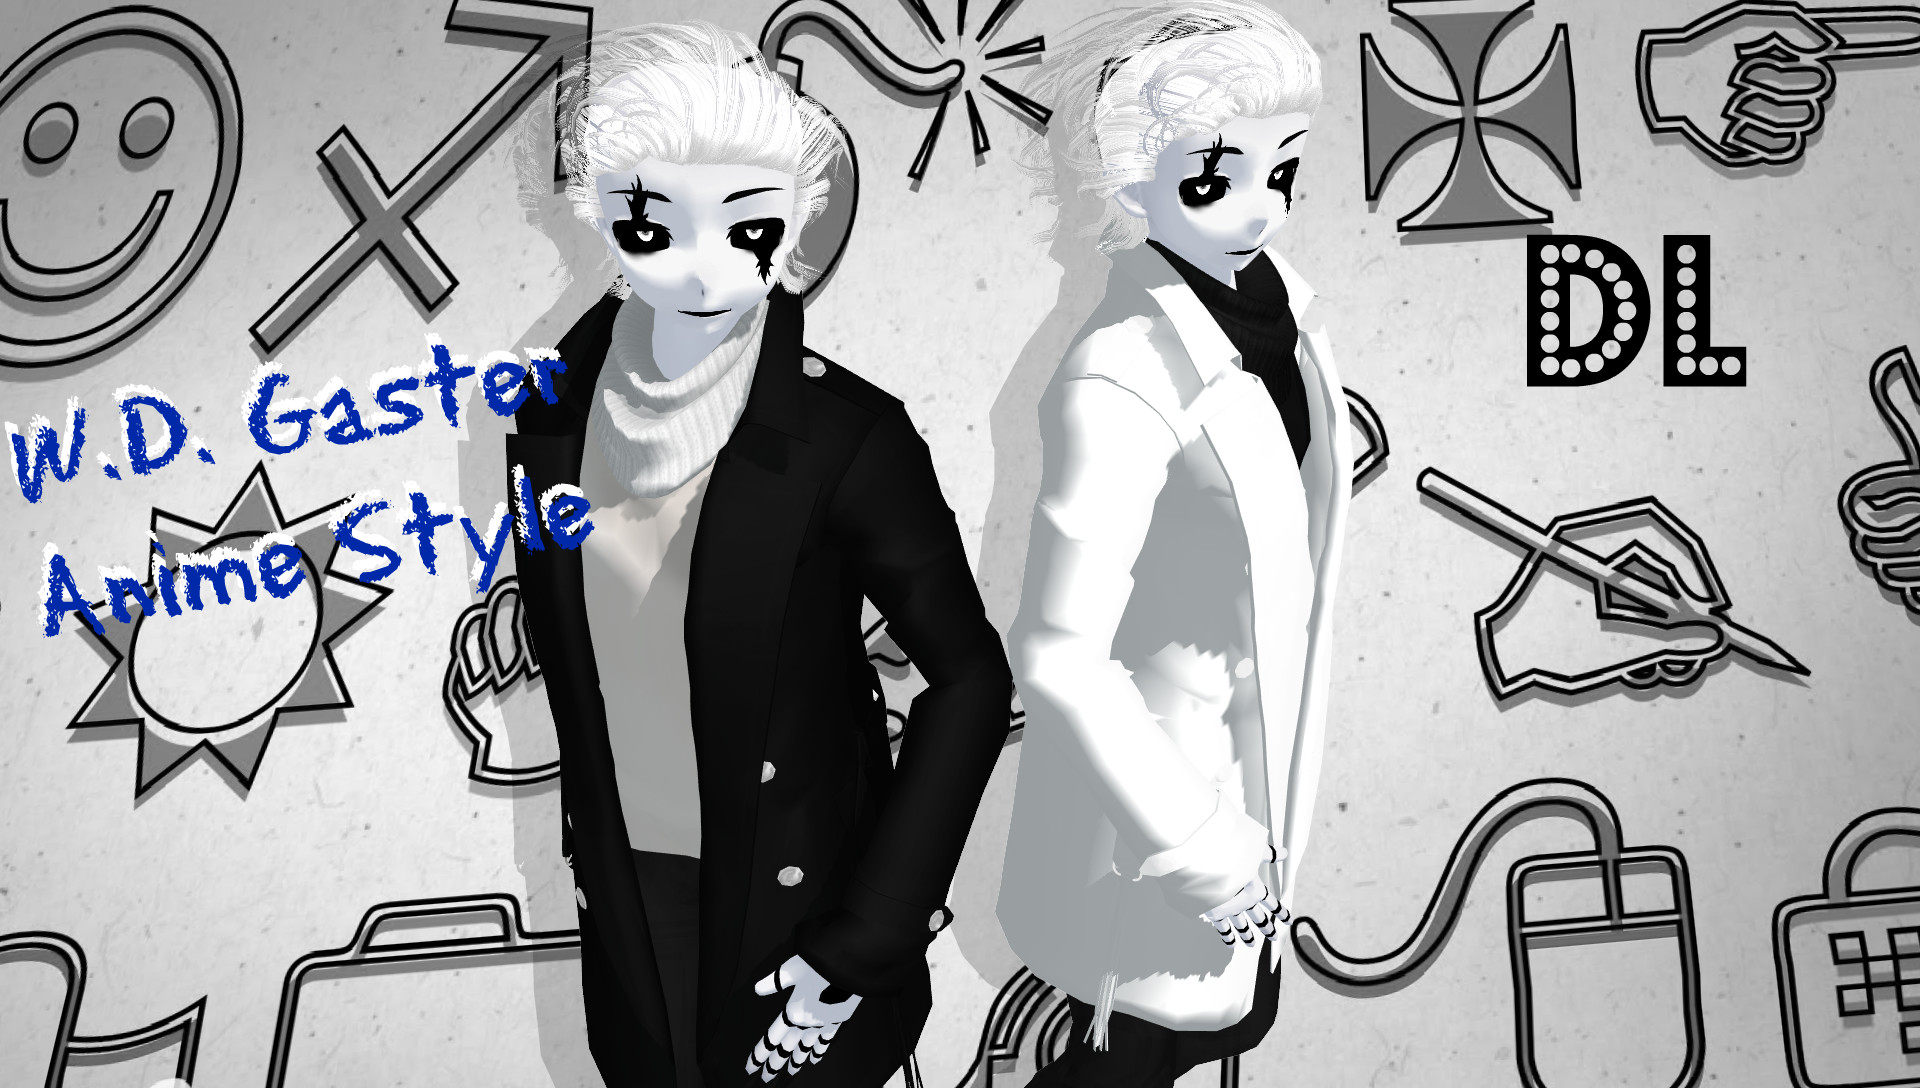 … UNDERTALE MMD W.D. Gaster Anime Style DL by Foxvinny-art